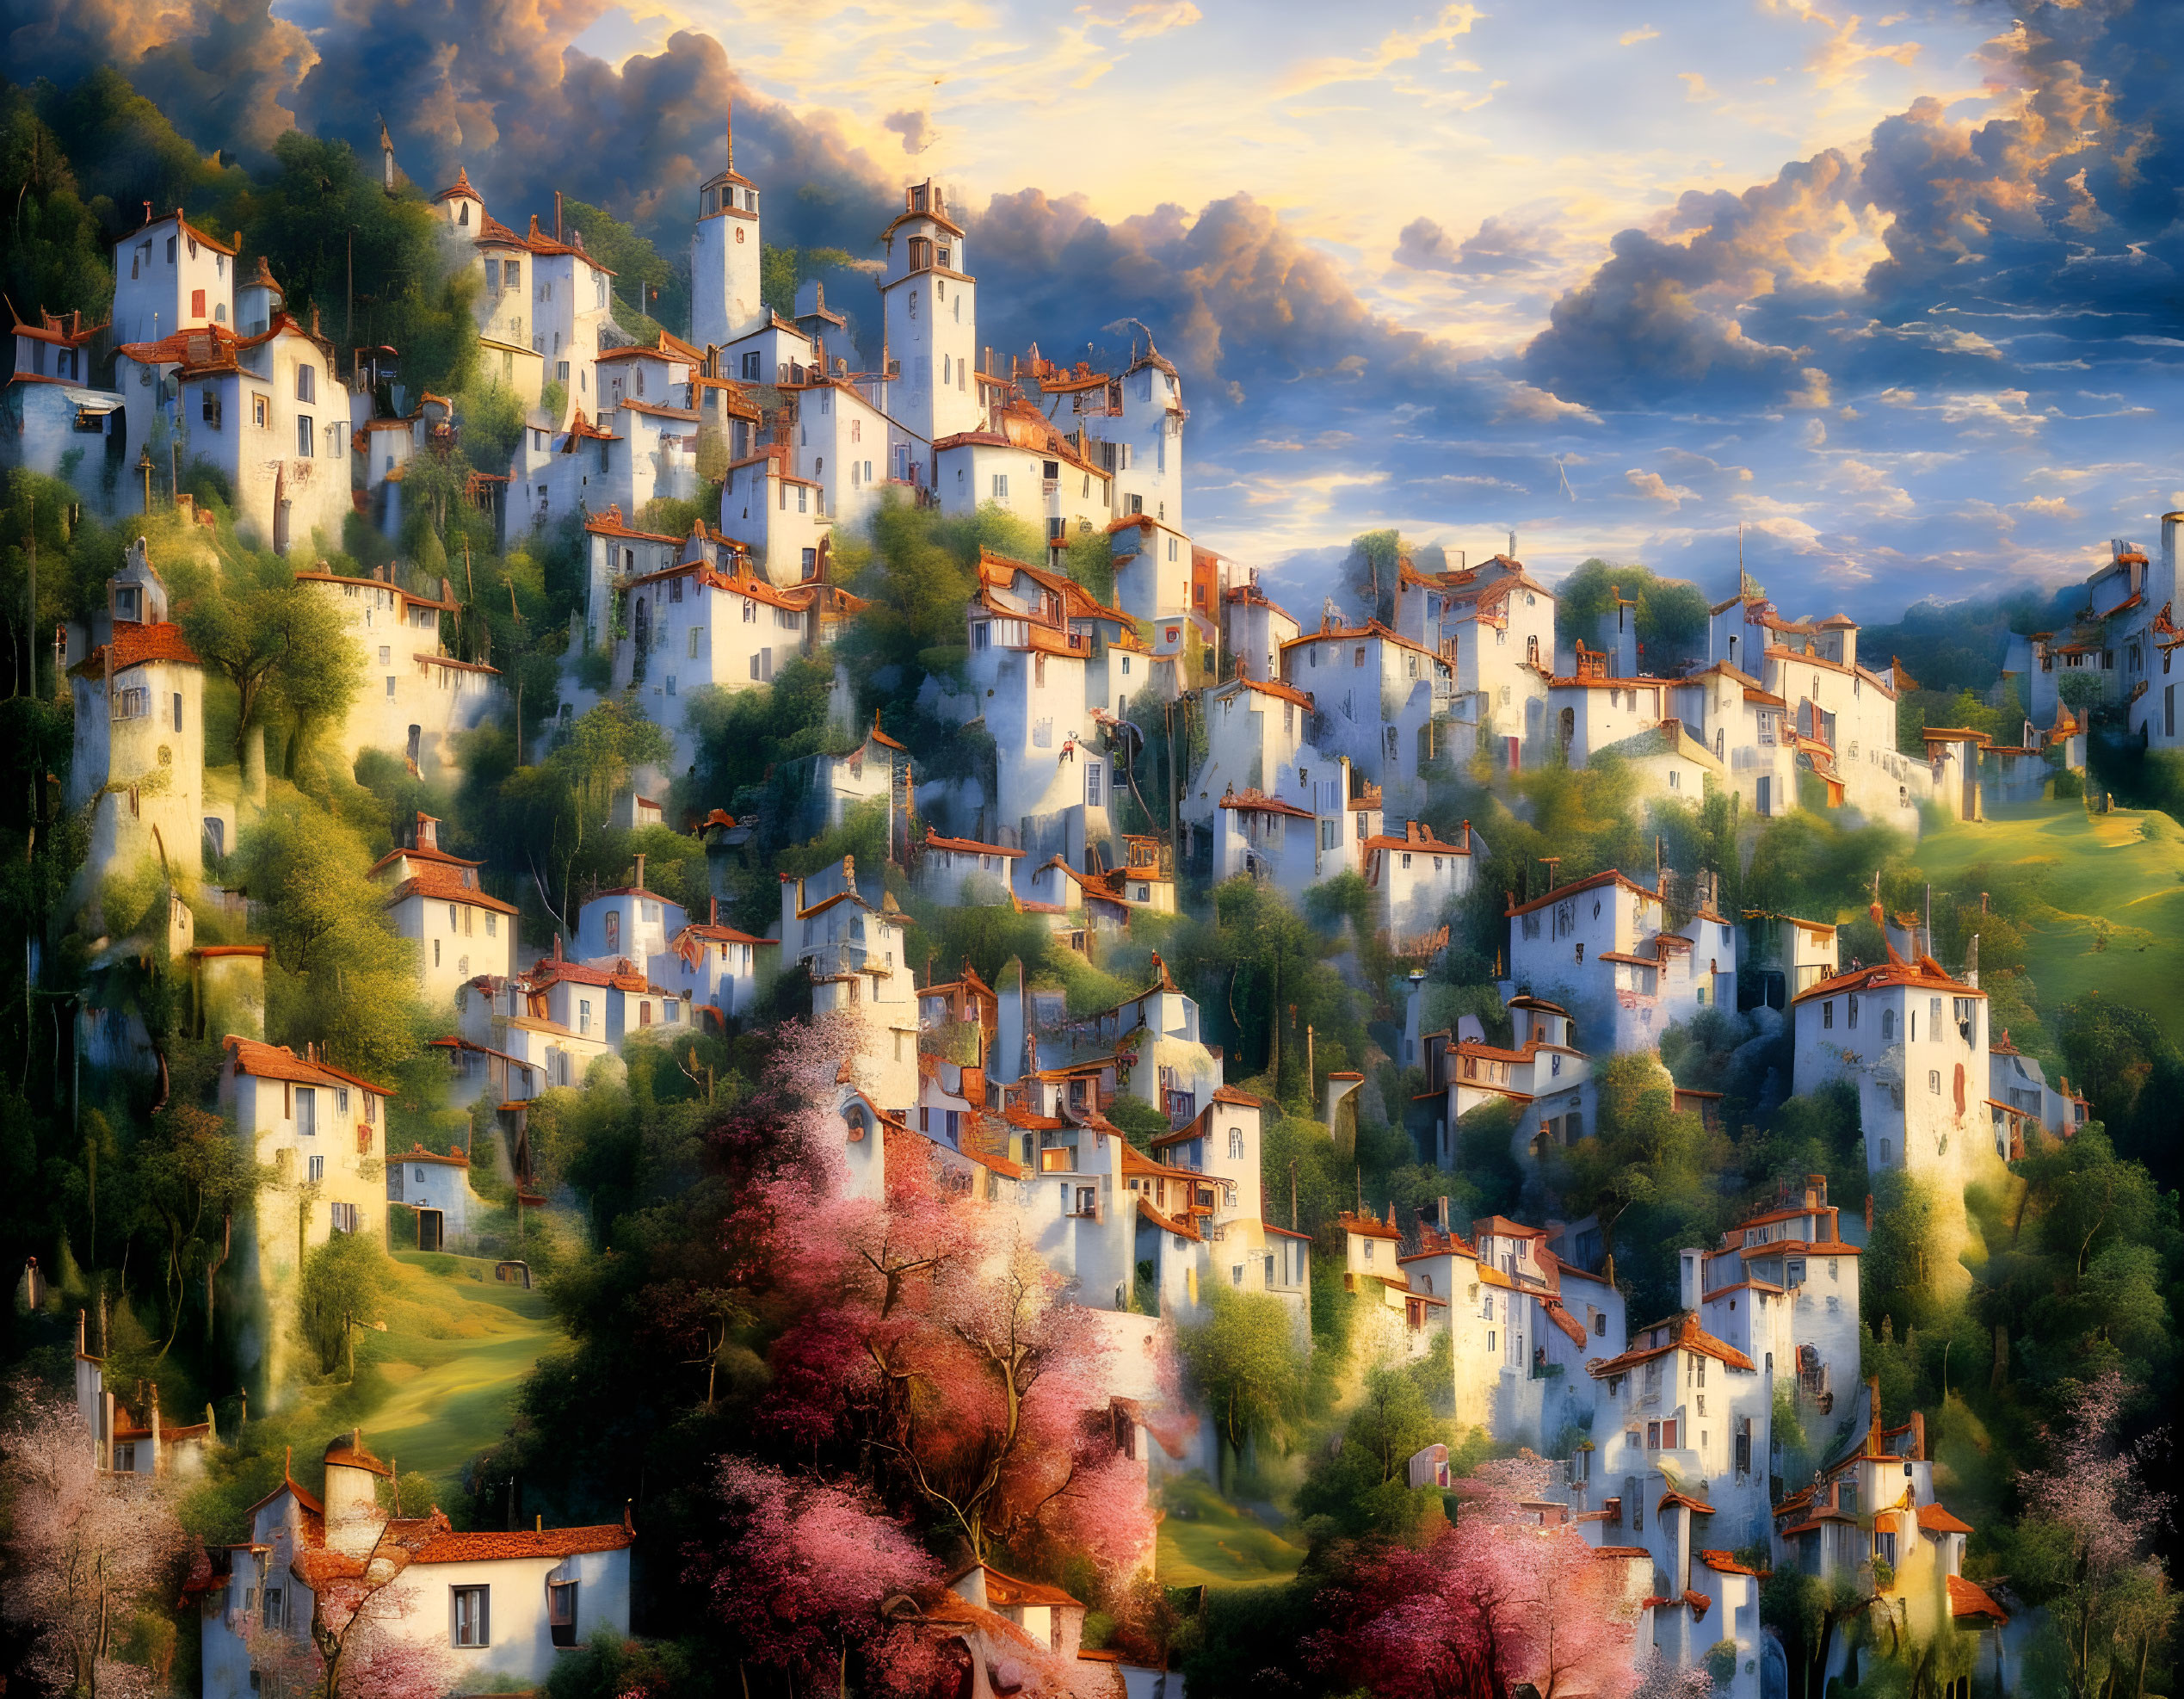 Scenic hillside village with terracotta-roofed white houses surrounded by lush greenery